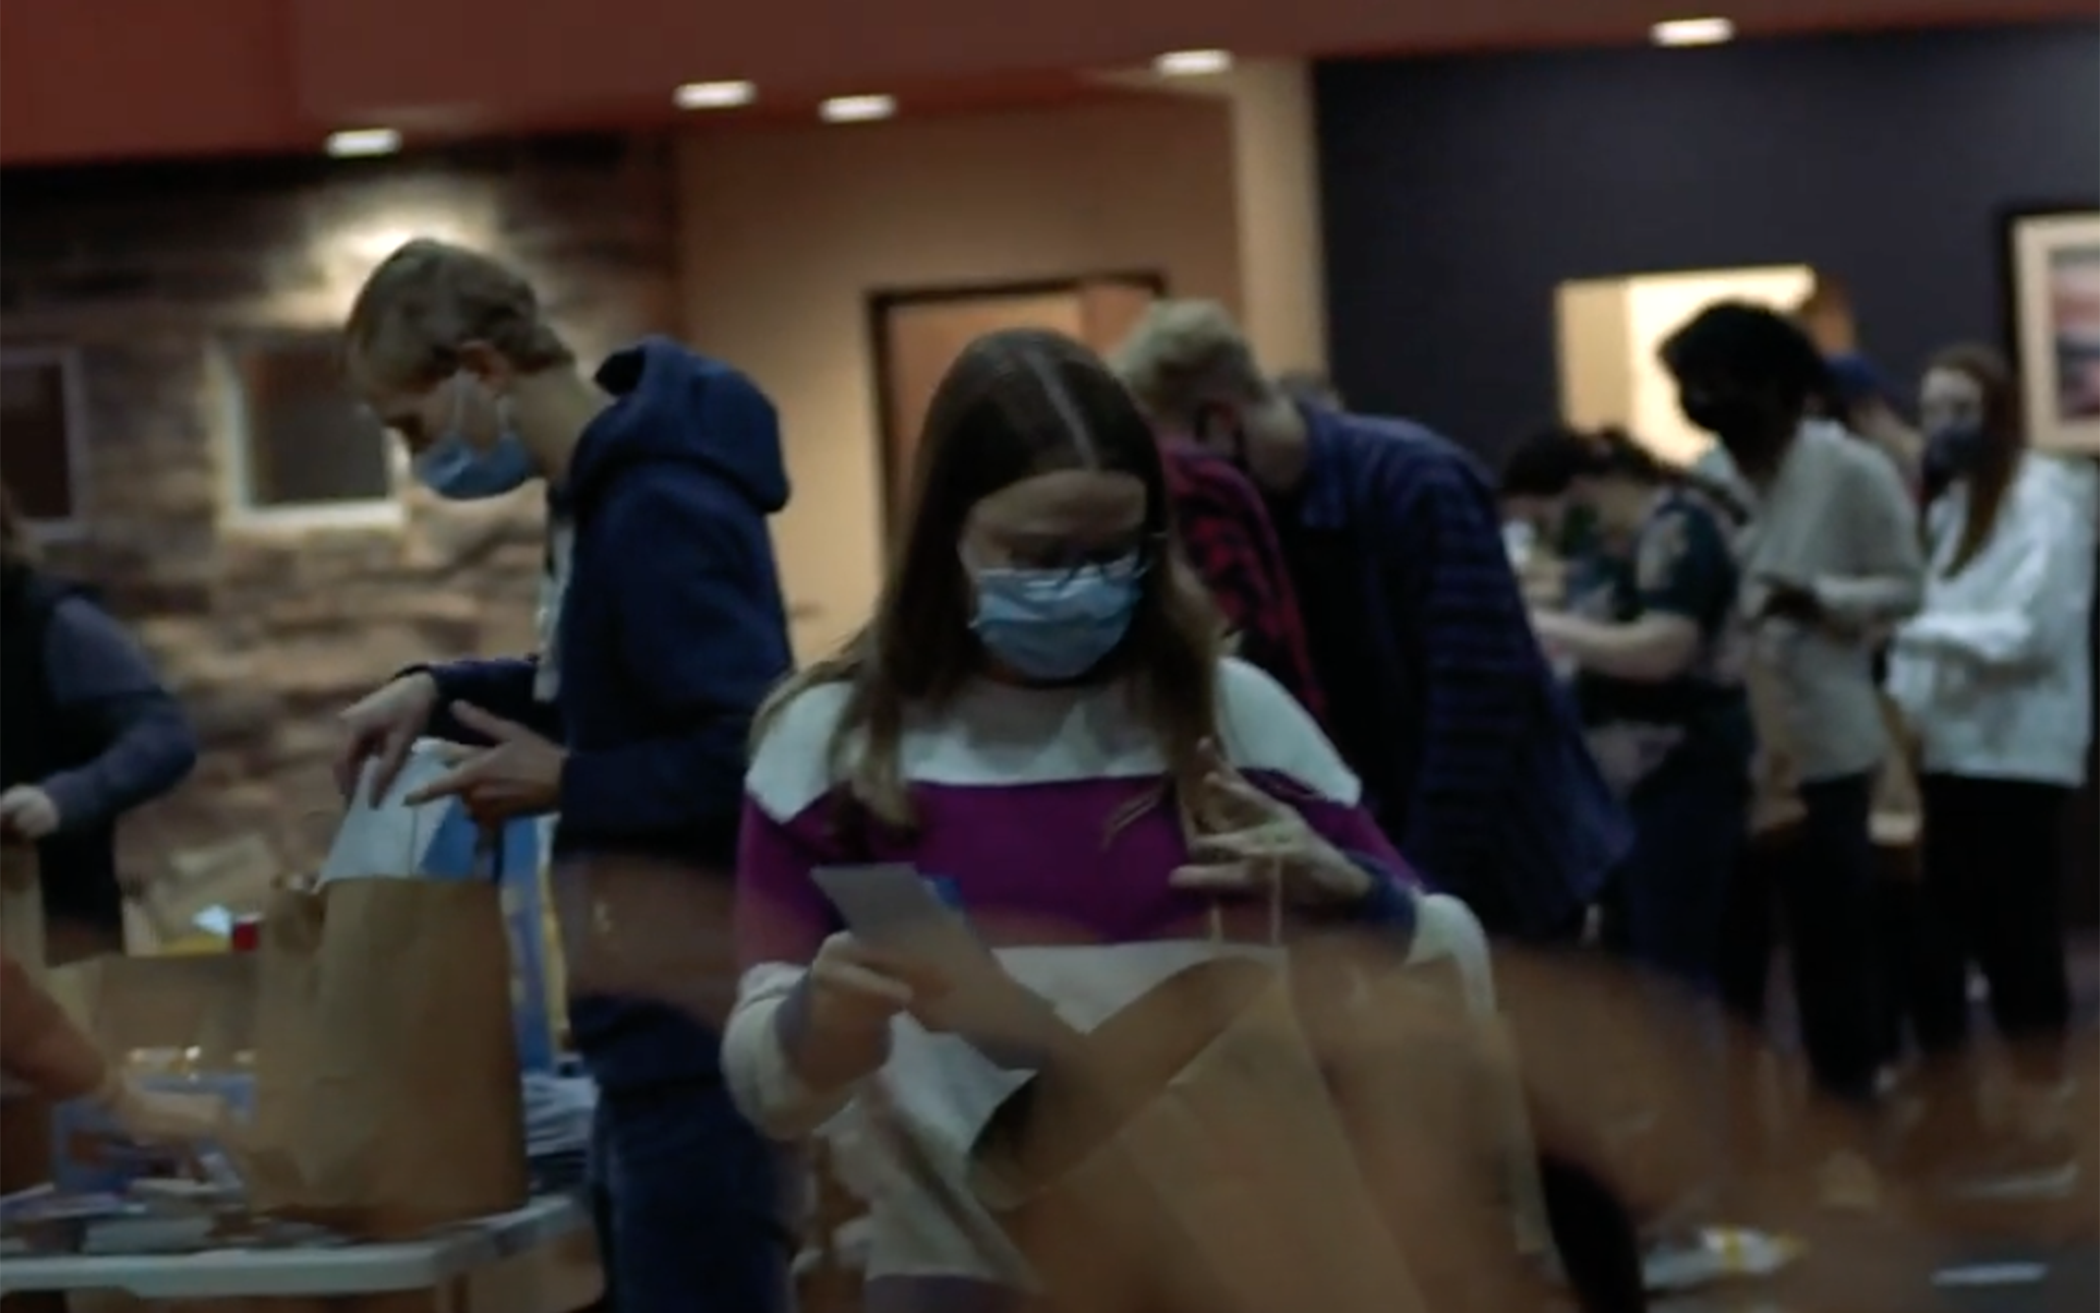 Campus Ministries Connect Amid COVID Pandemic